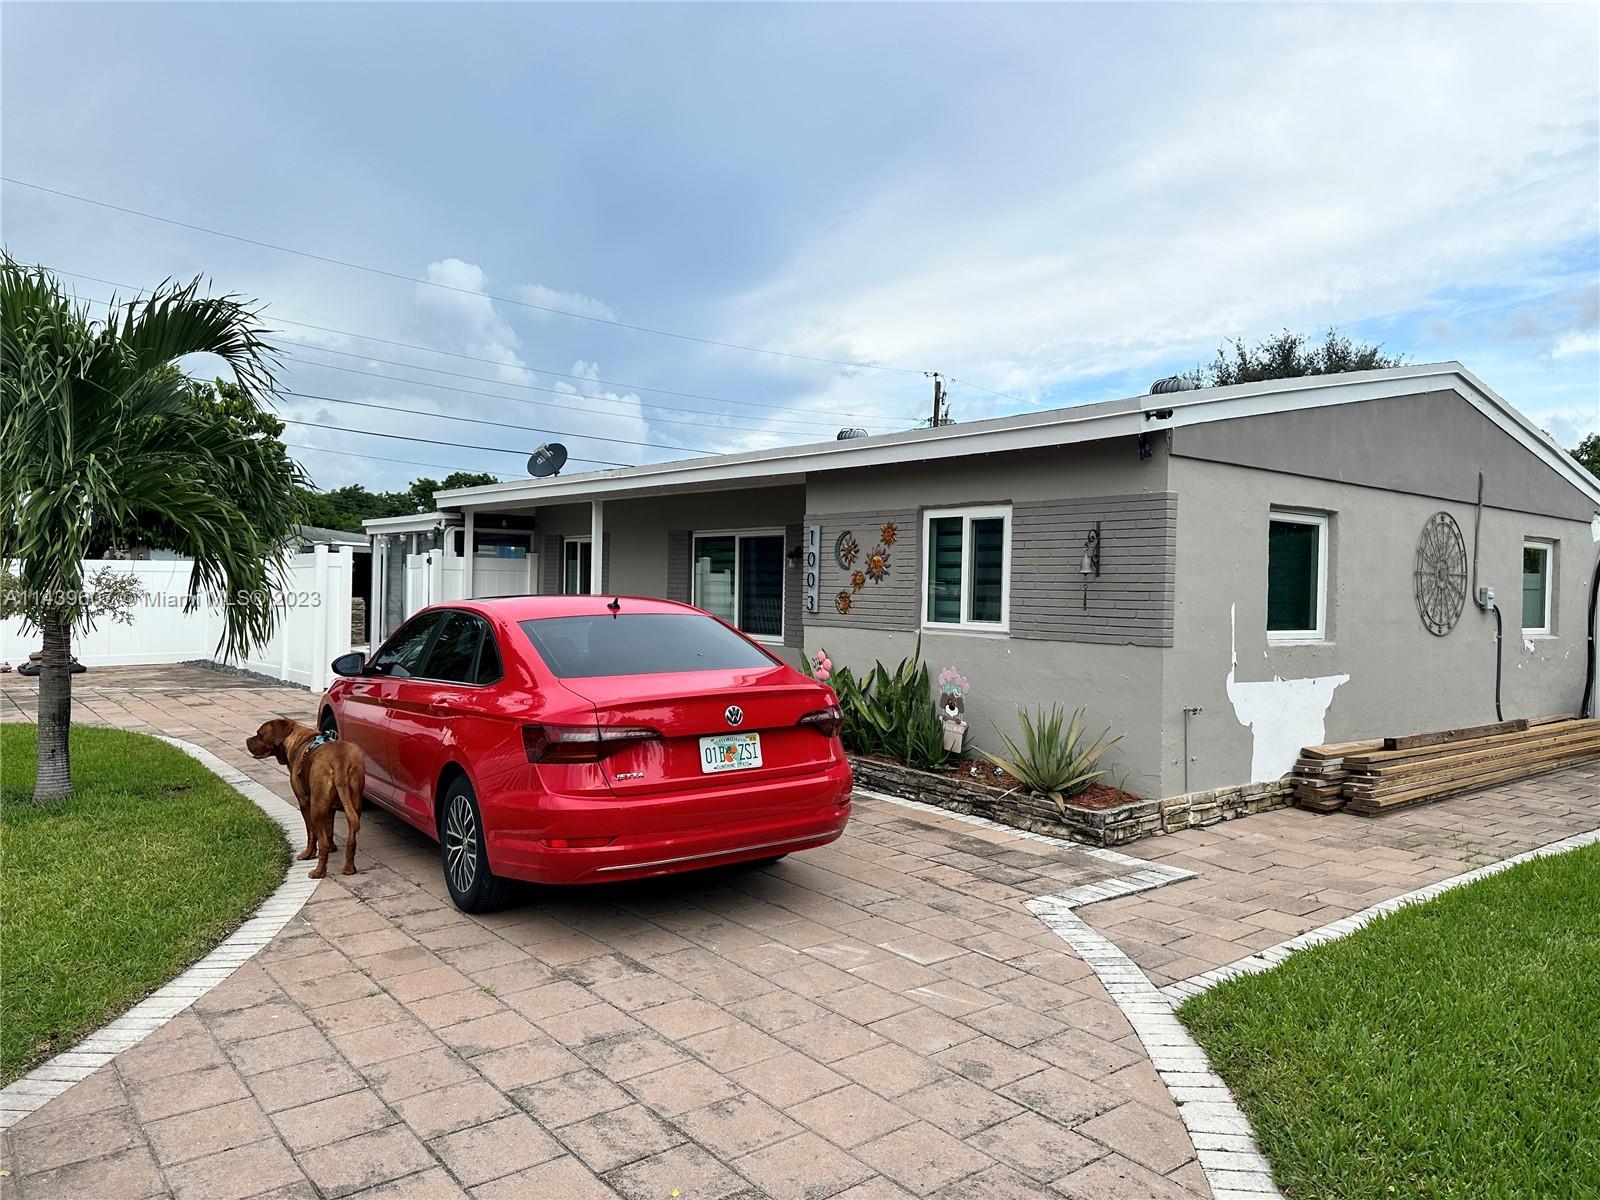 Photo of 1003 N 63rd Ave in Hollywood, FL